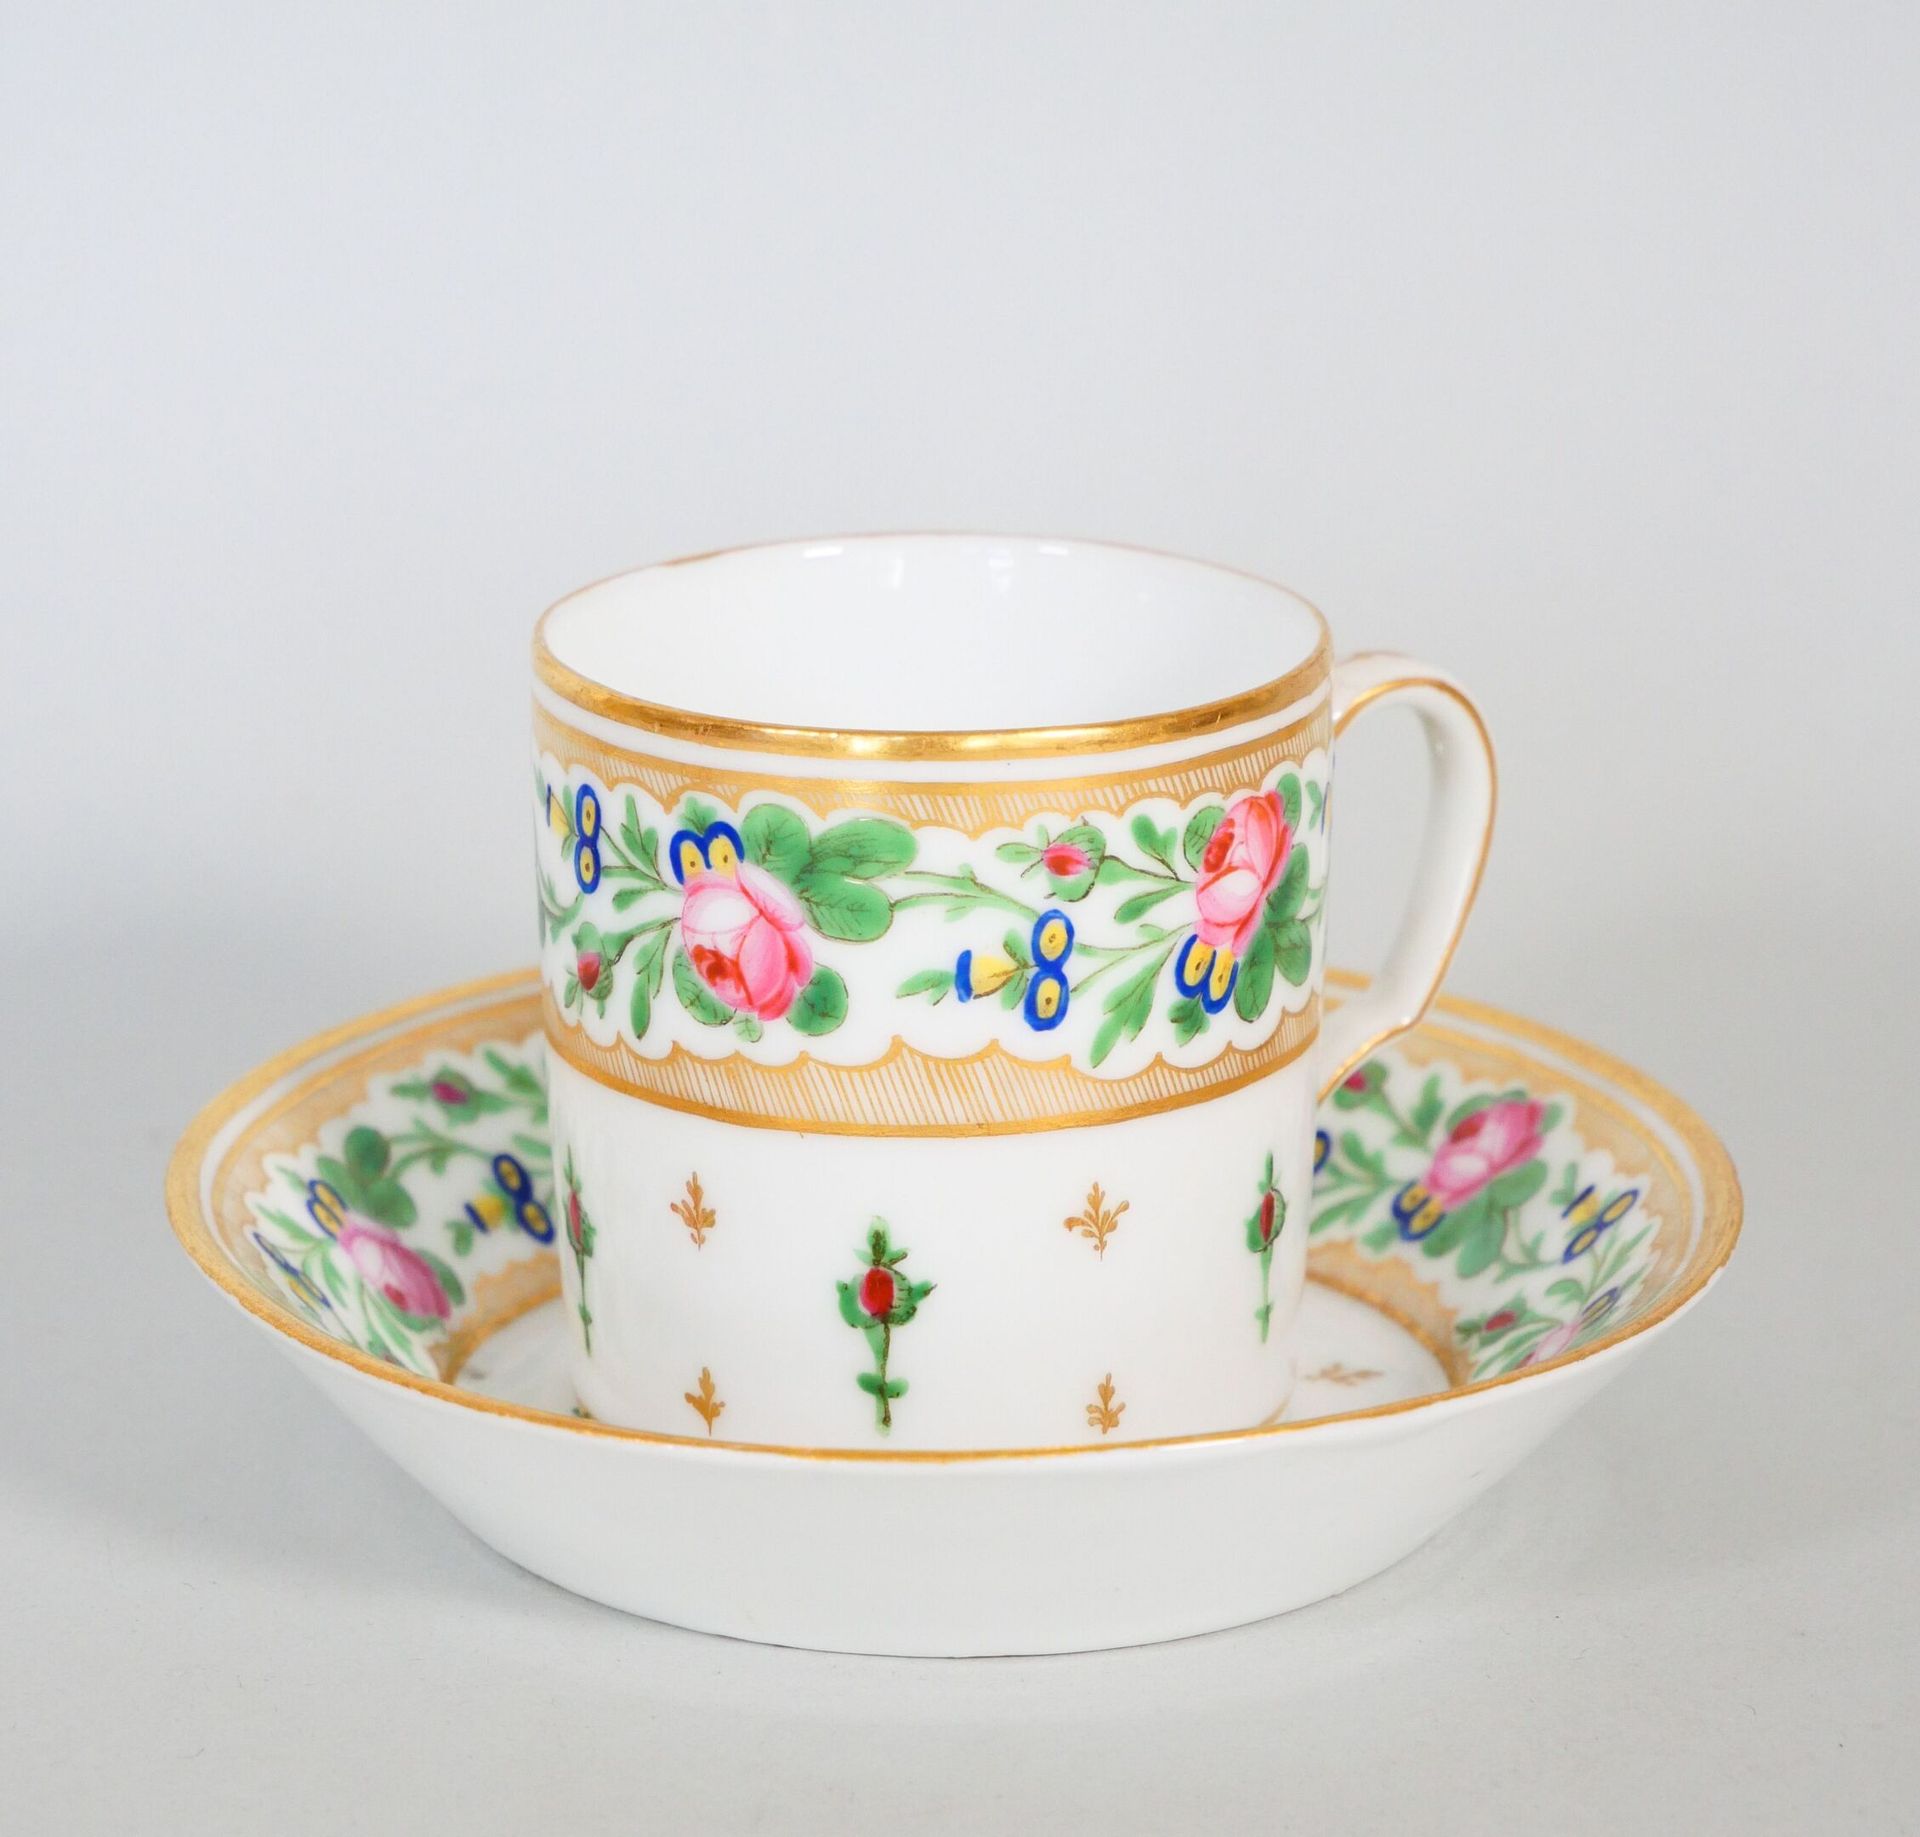 Null PARIS (Nast):
Porcelain litron cup and saucer with polychrome and gold deco&hellip;